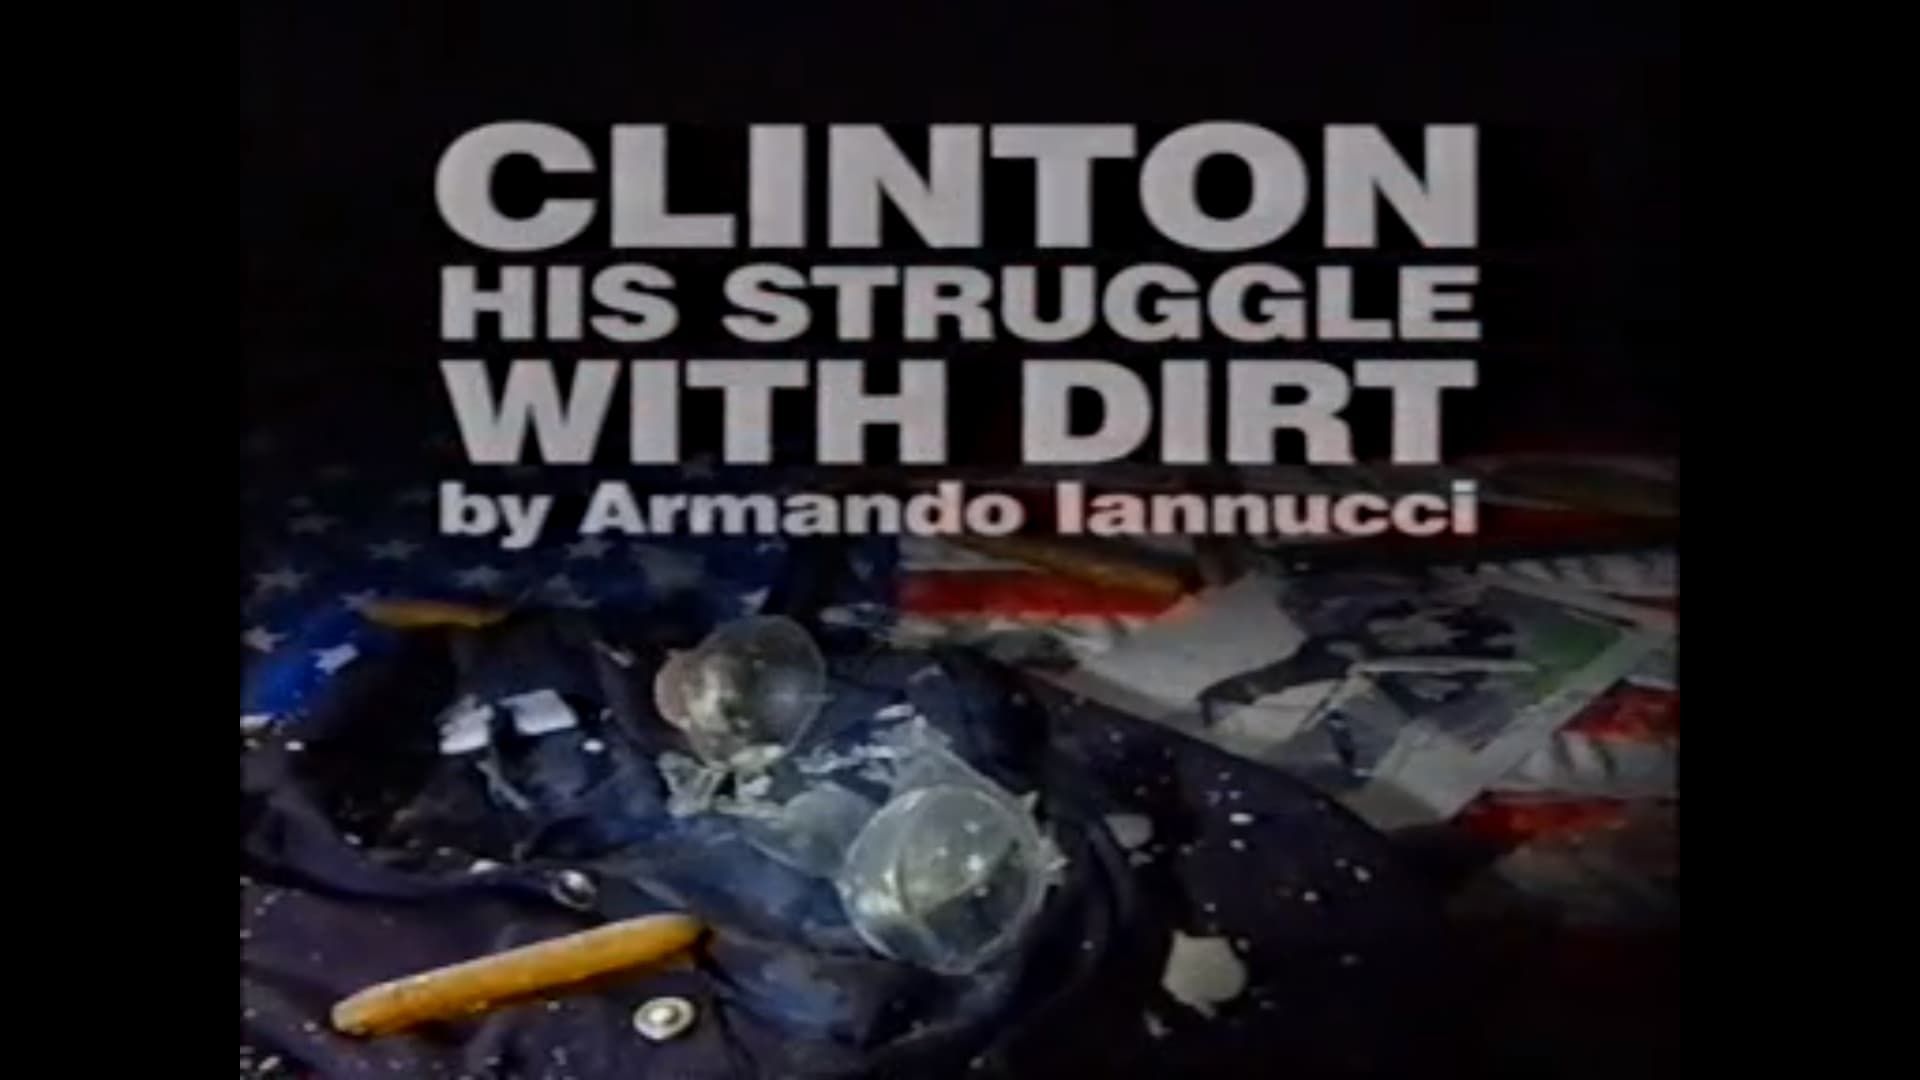 Clinton: His Struggle with Dirt background